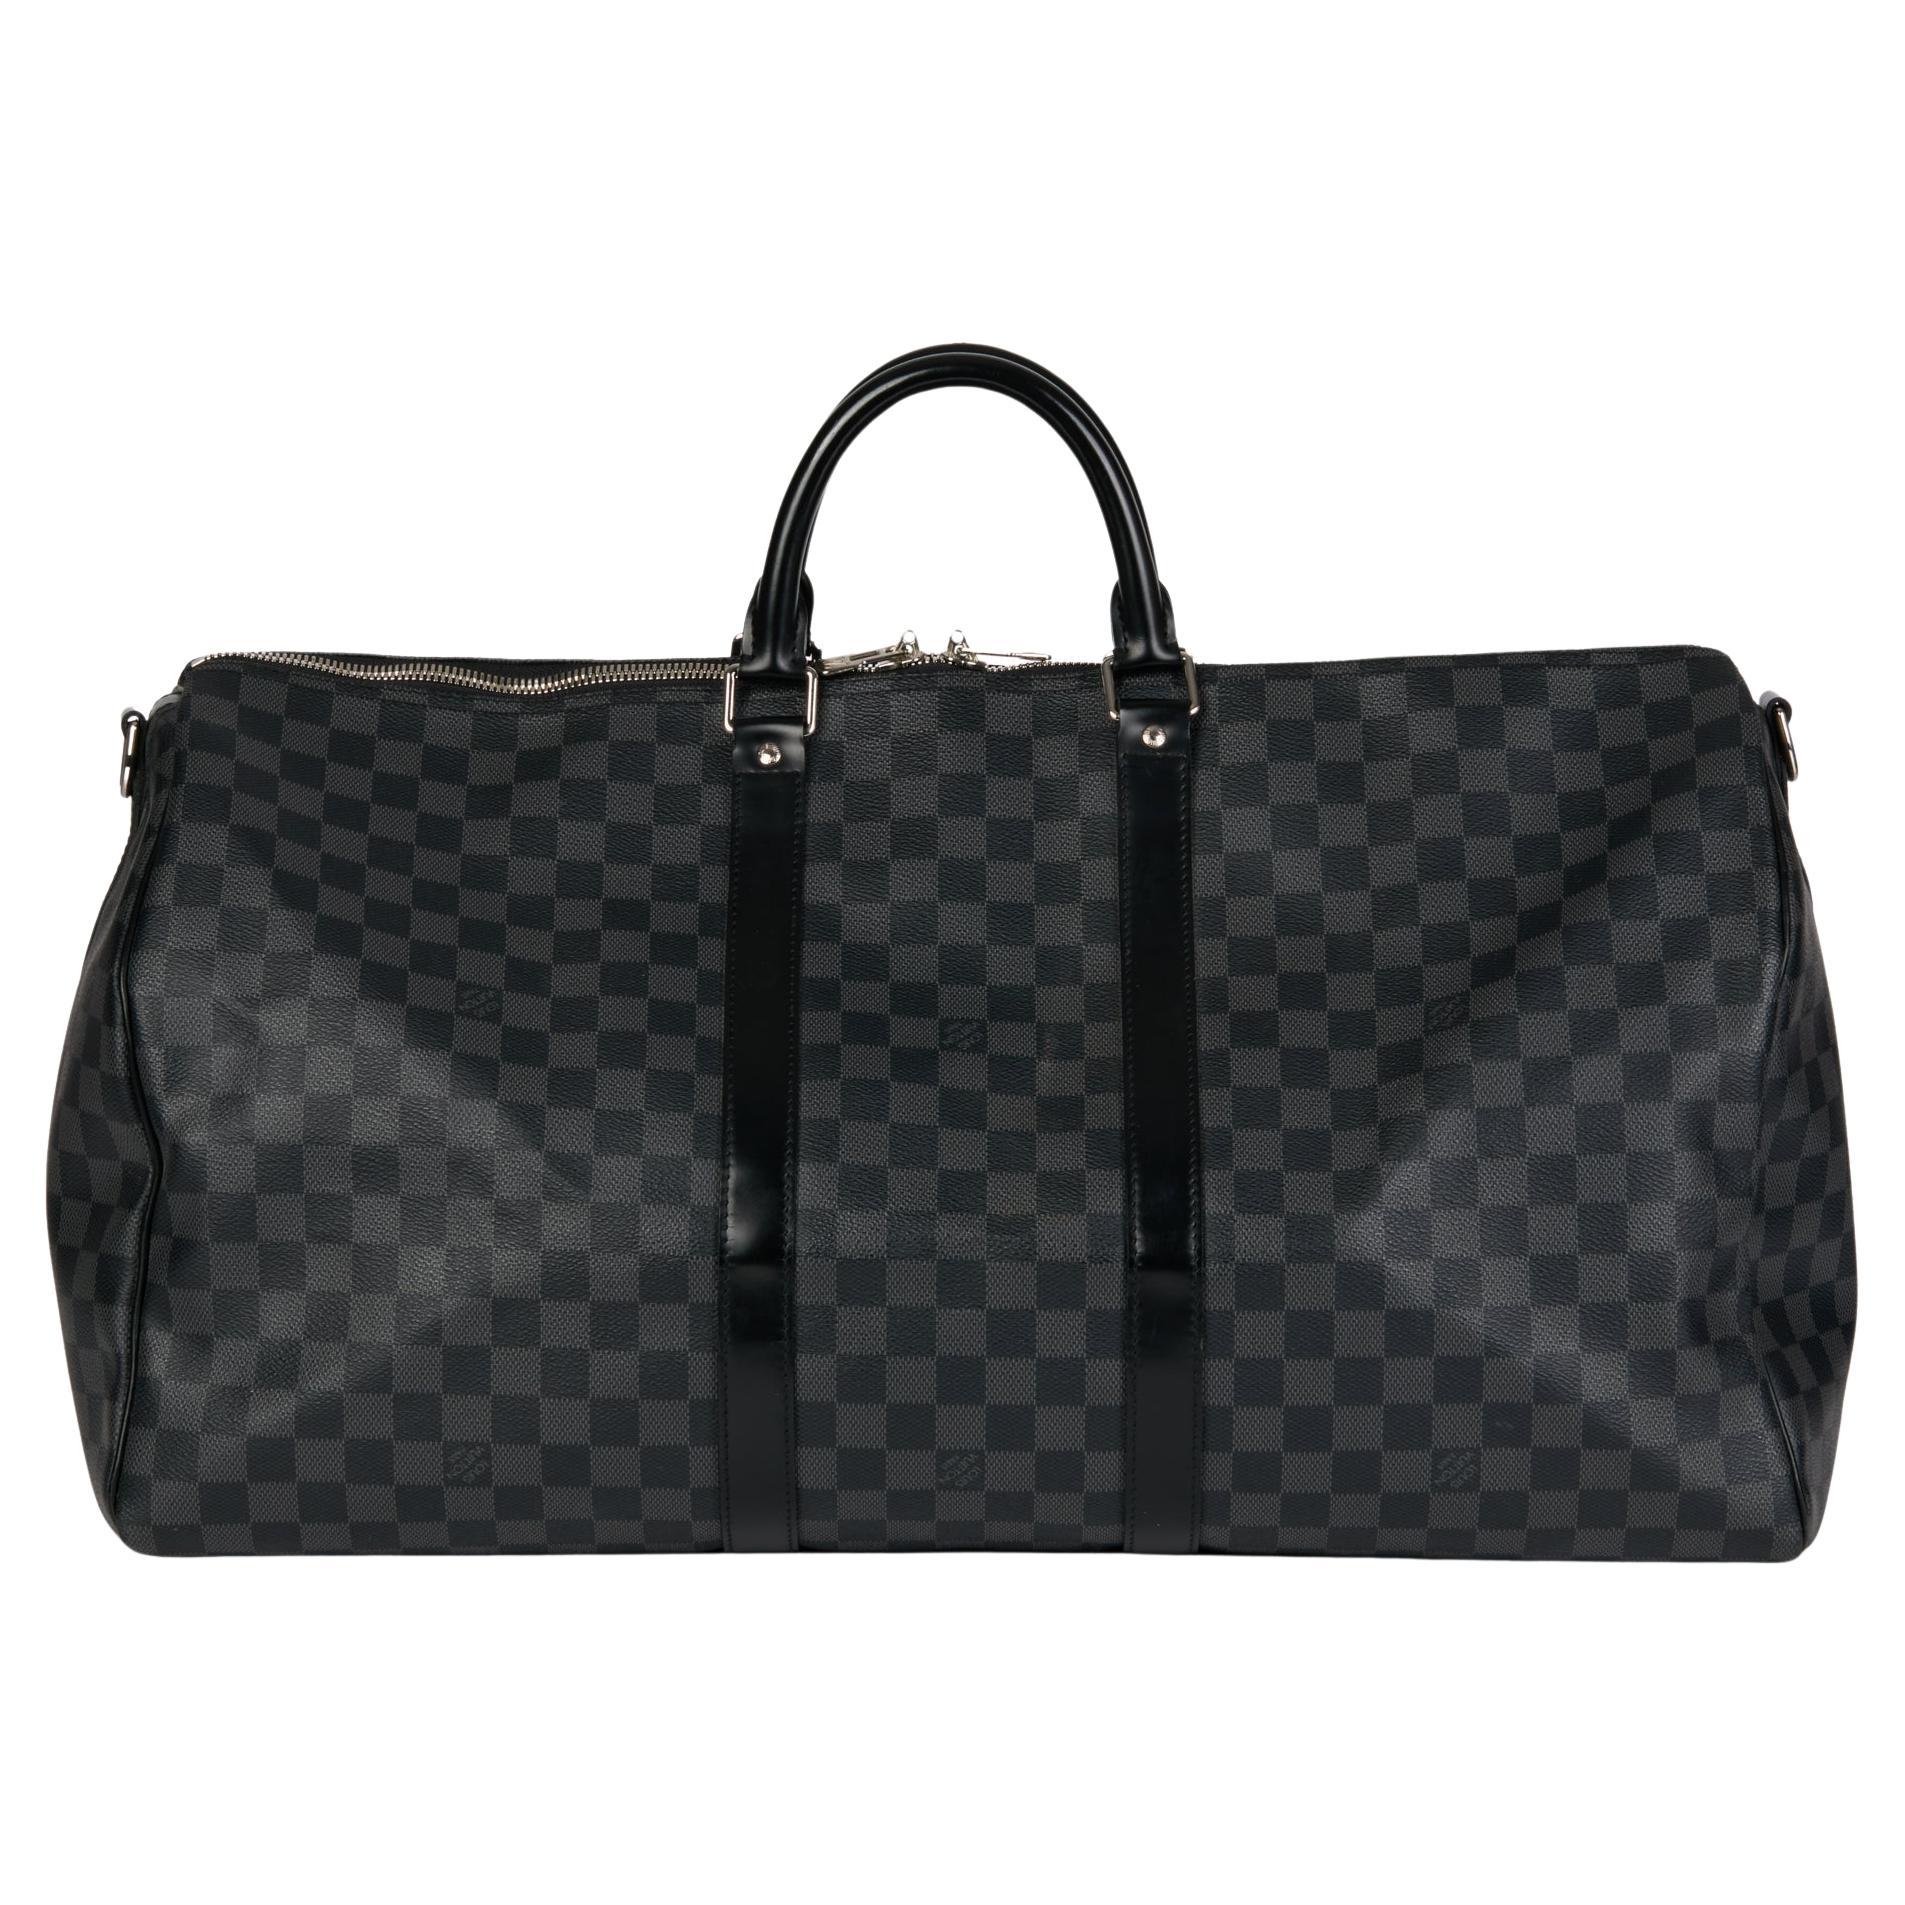 LOUIS VUITTON Graphite Damier Coated Canvas & Black Calfskin Leather Keepall 55 